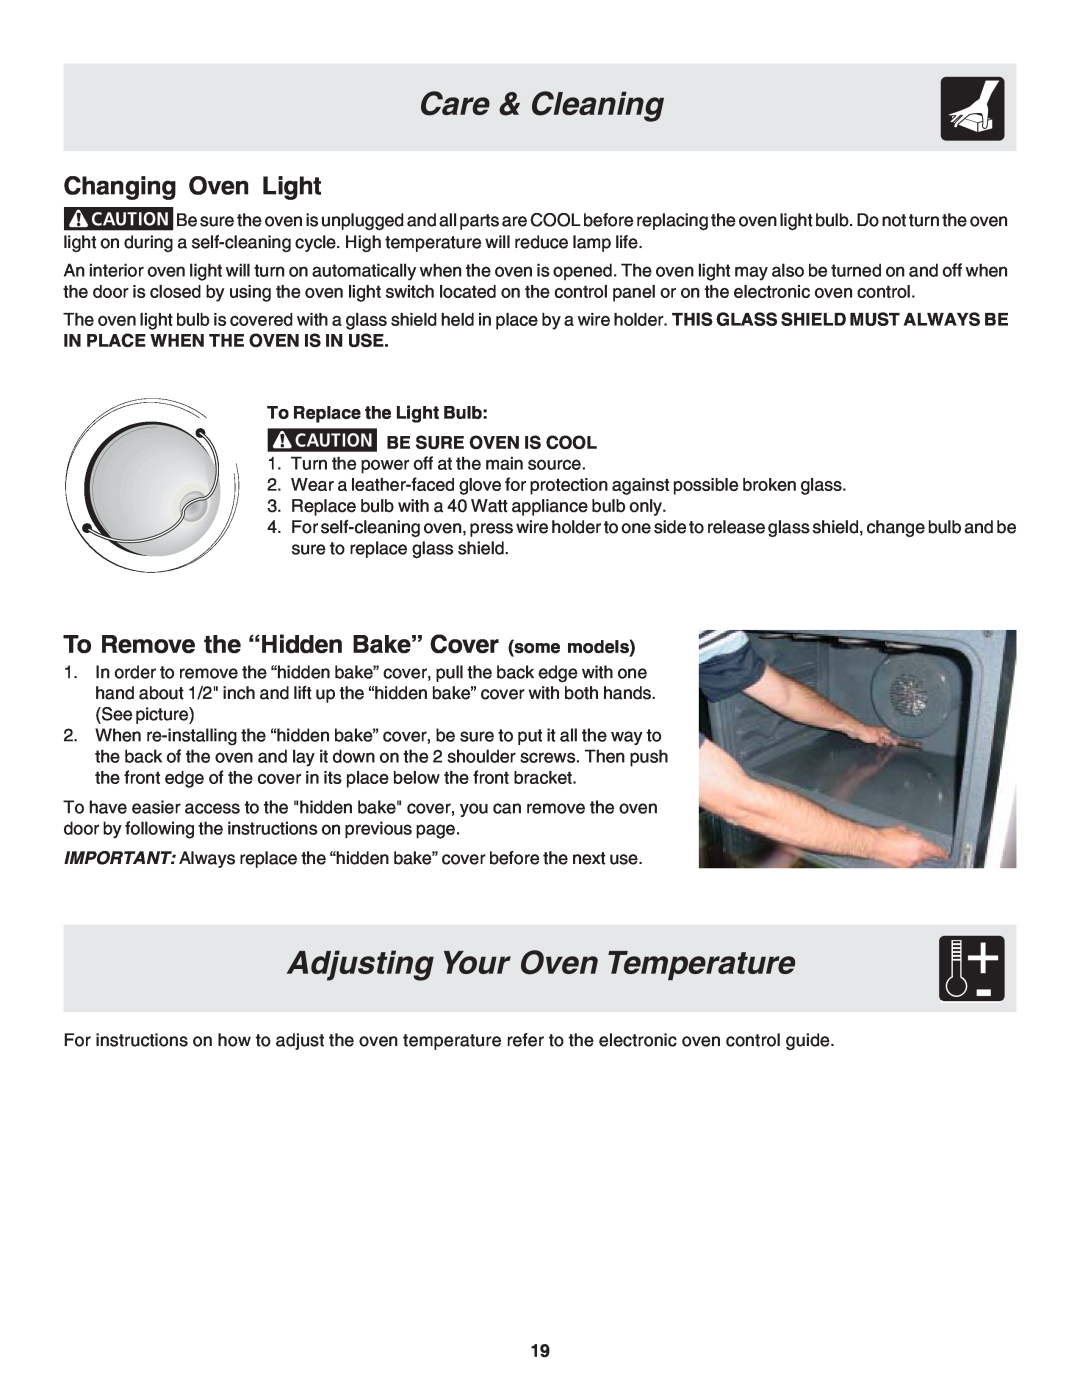 Frigidaire 318203875 warranty Adjusting Your Oven Temperature, Care & Cleaning, Changing Oven Light, Be Sure Oven Is Cool 